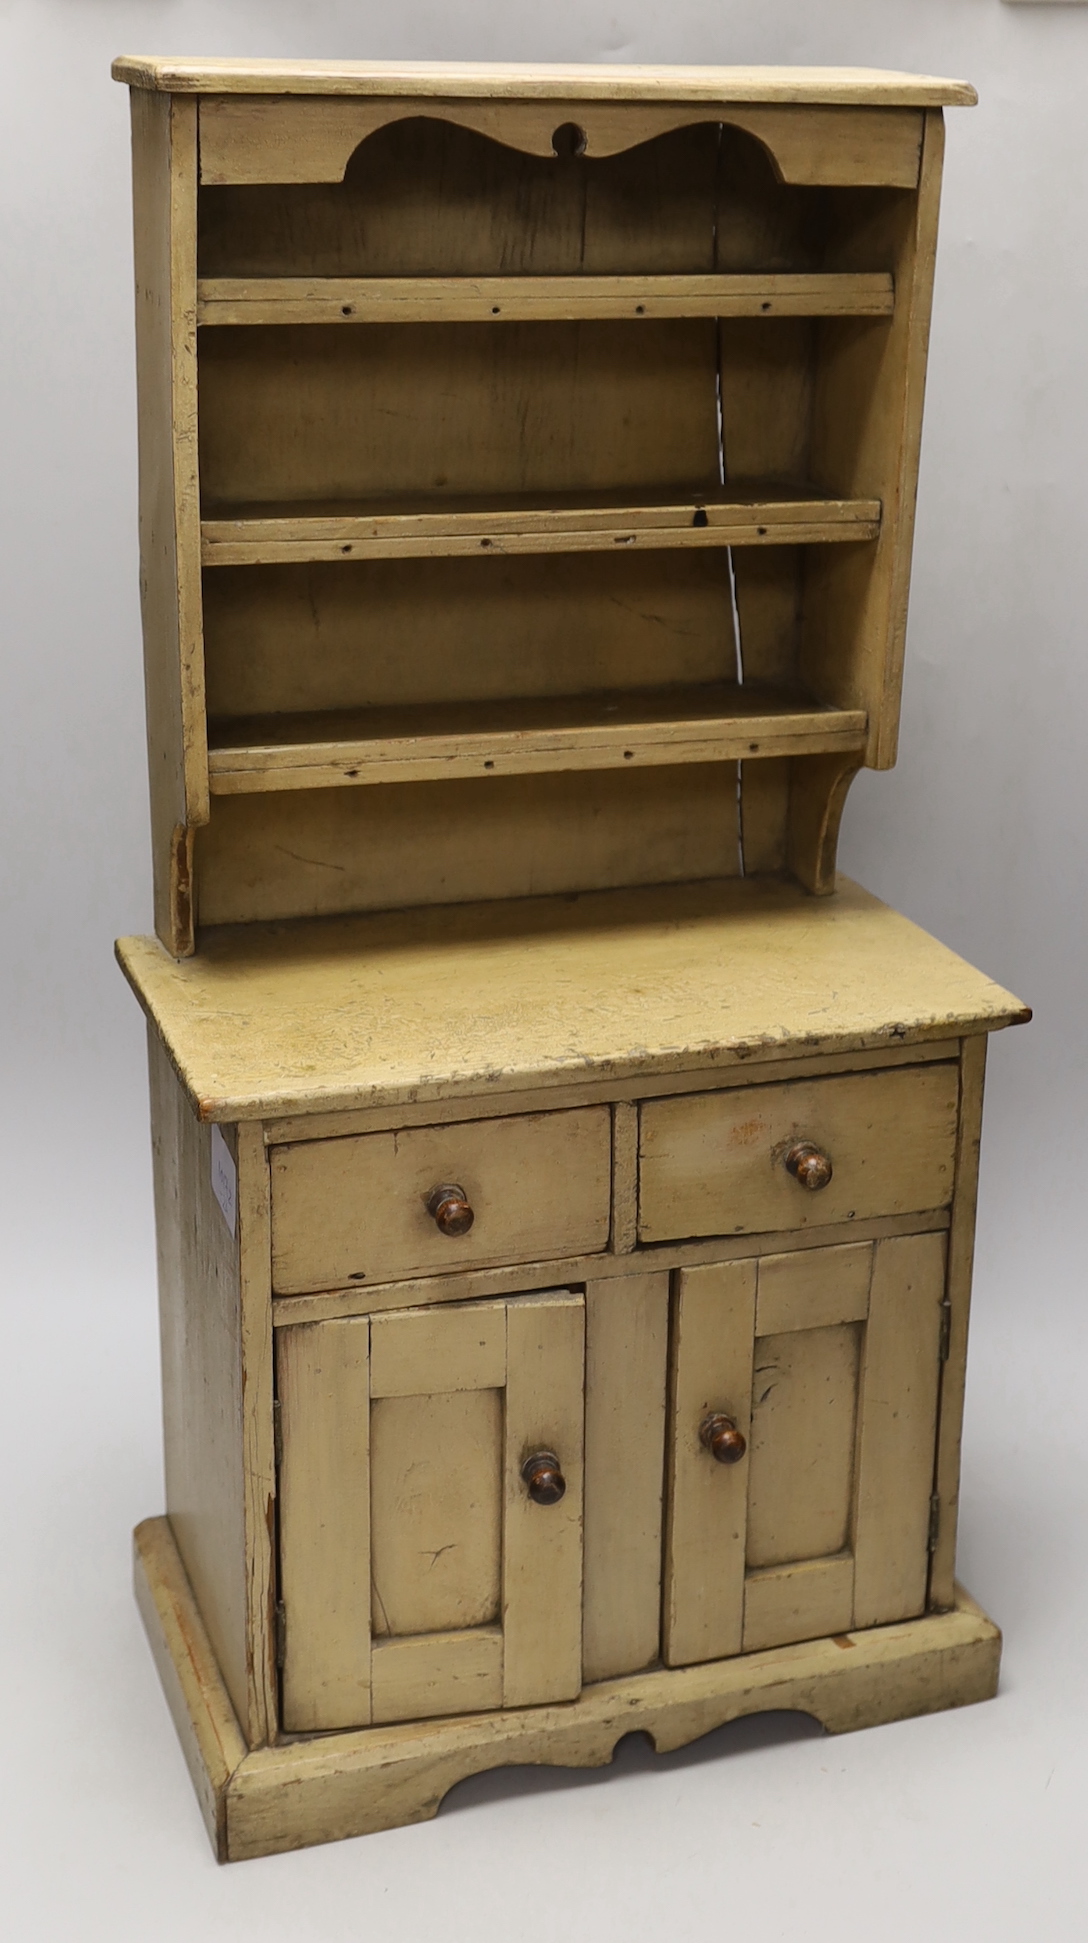 A 19th century painted pine miniature dresser and rack, 67cm high